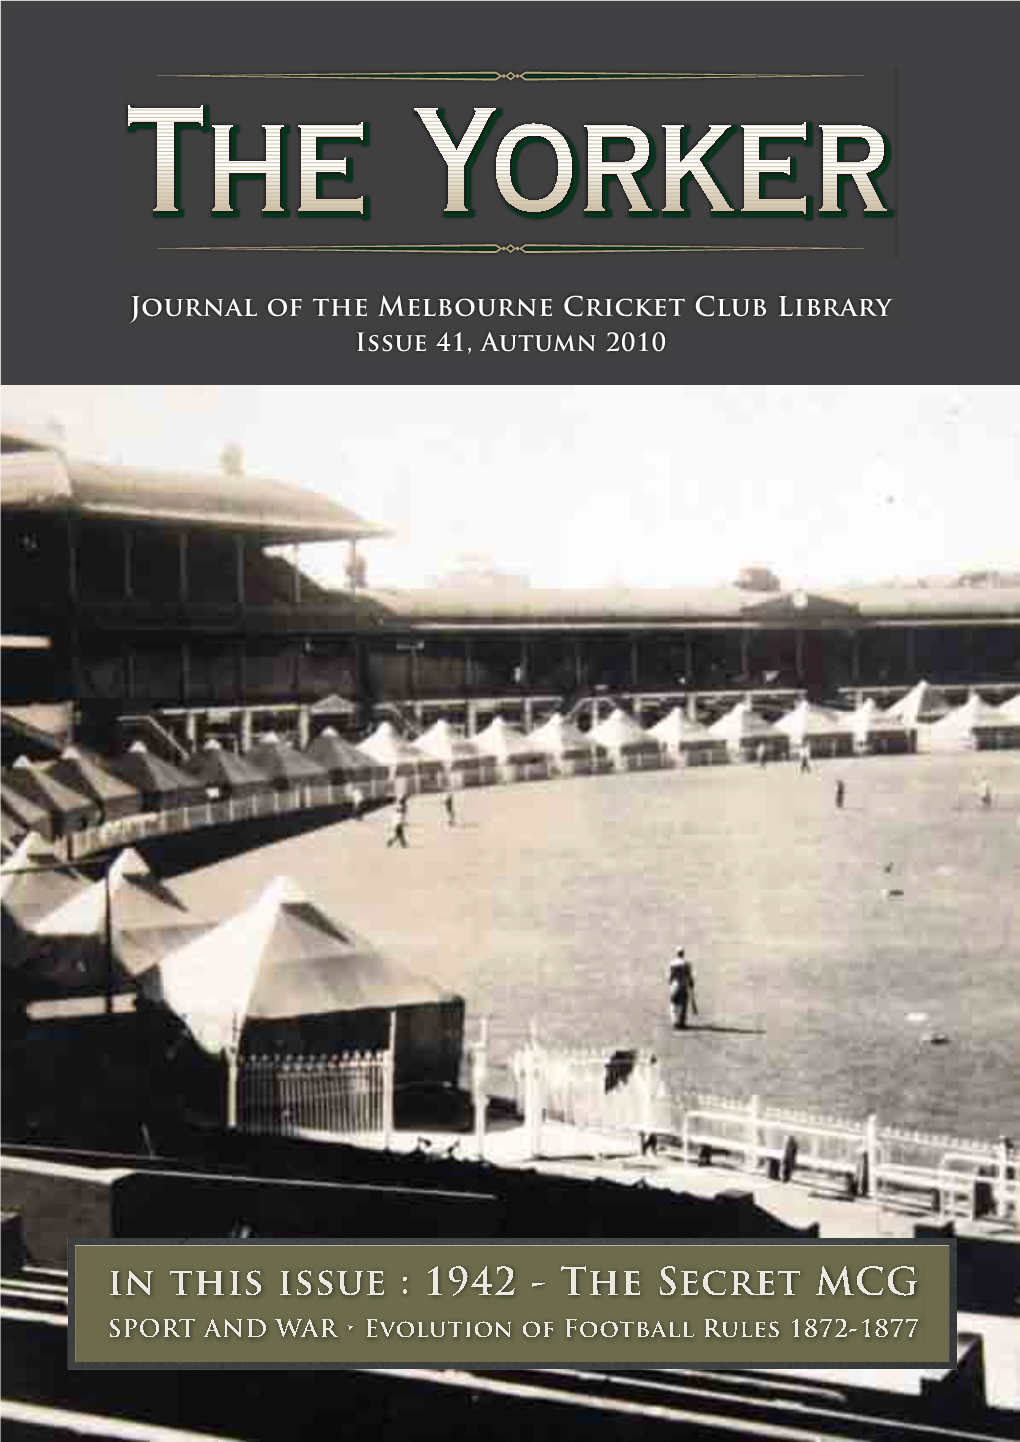 Journal of the Melbourne Cricket Club Library Issue 41, Autumn 2010